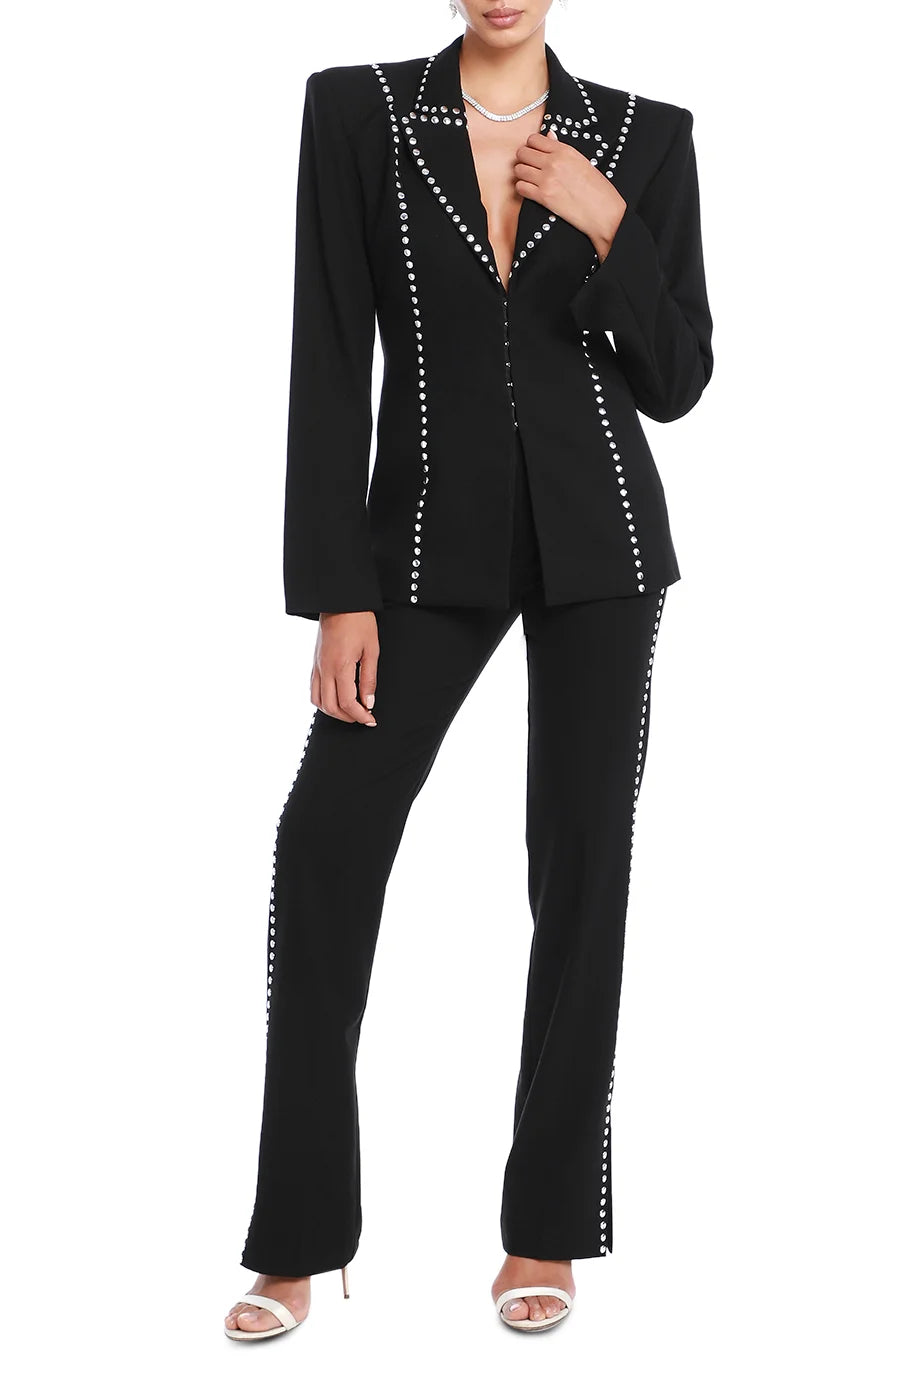 Cassius Studded Blazer With Shoulder Pads